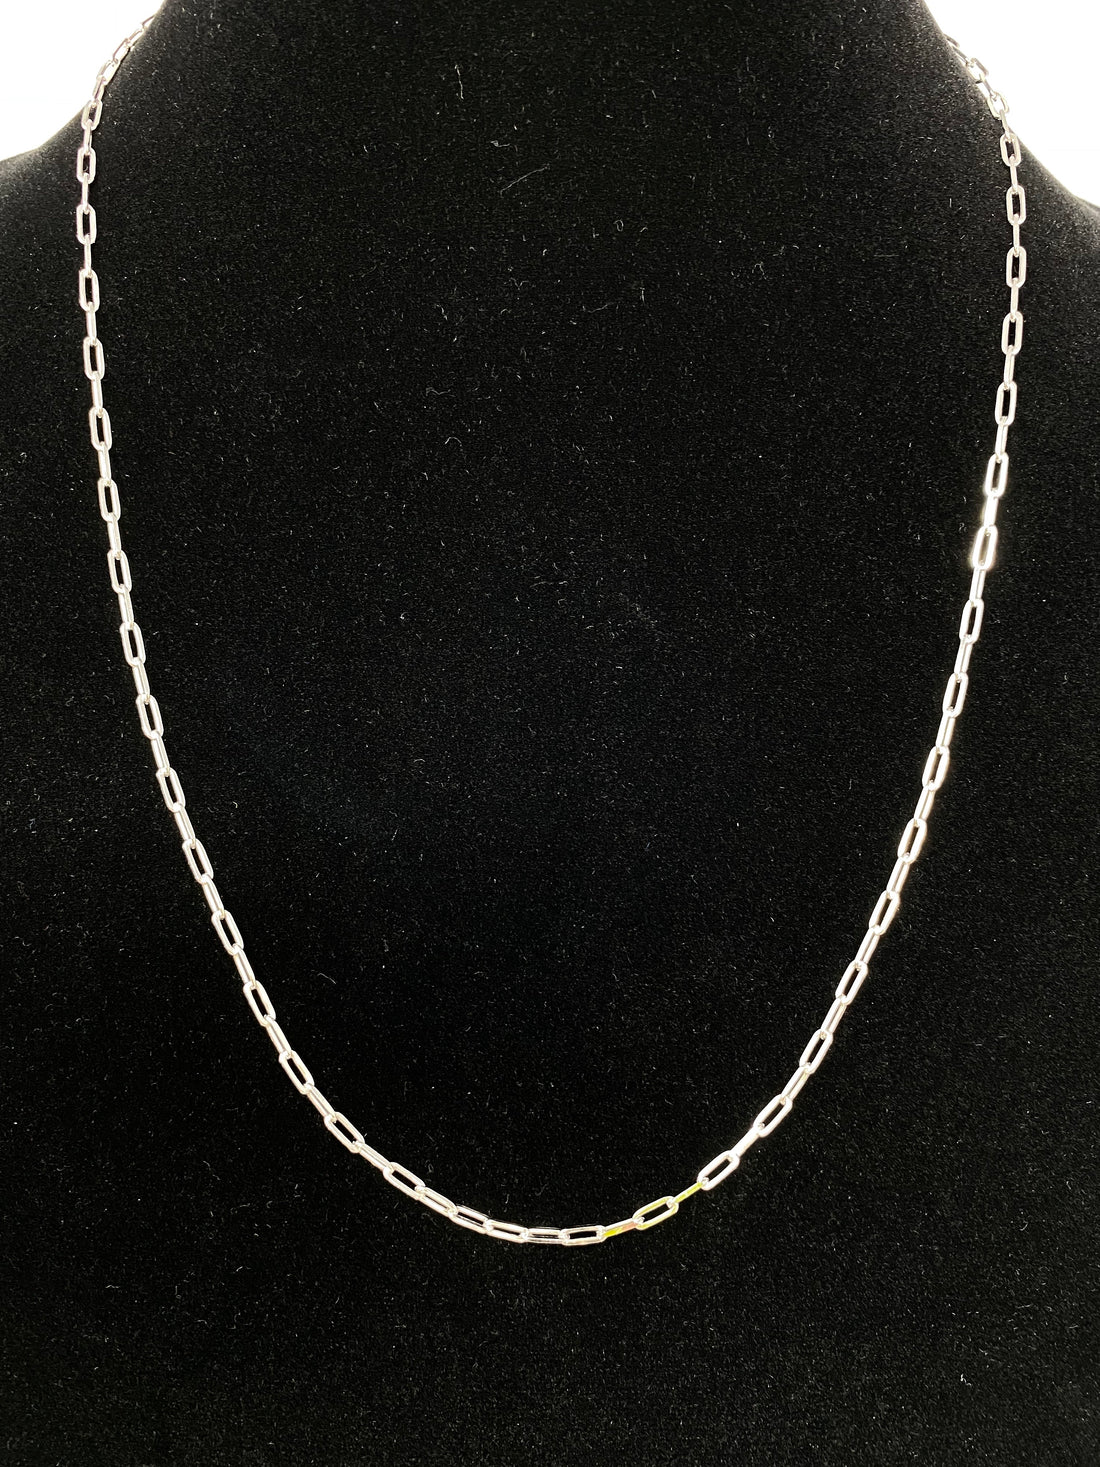 Charming Chainlink Necklace in Silver 24"